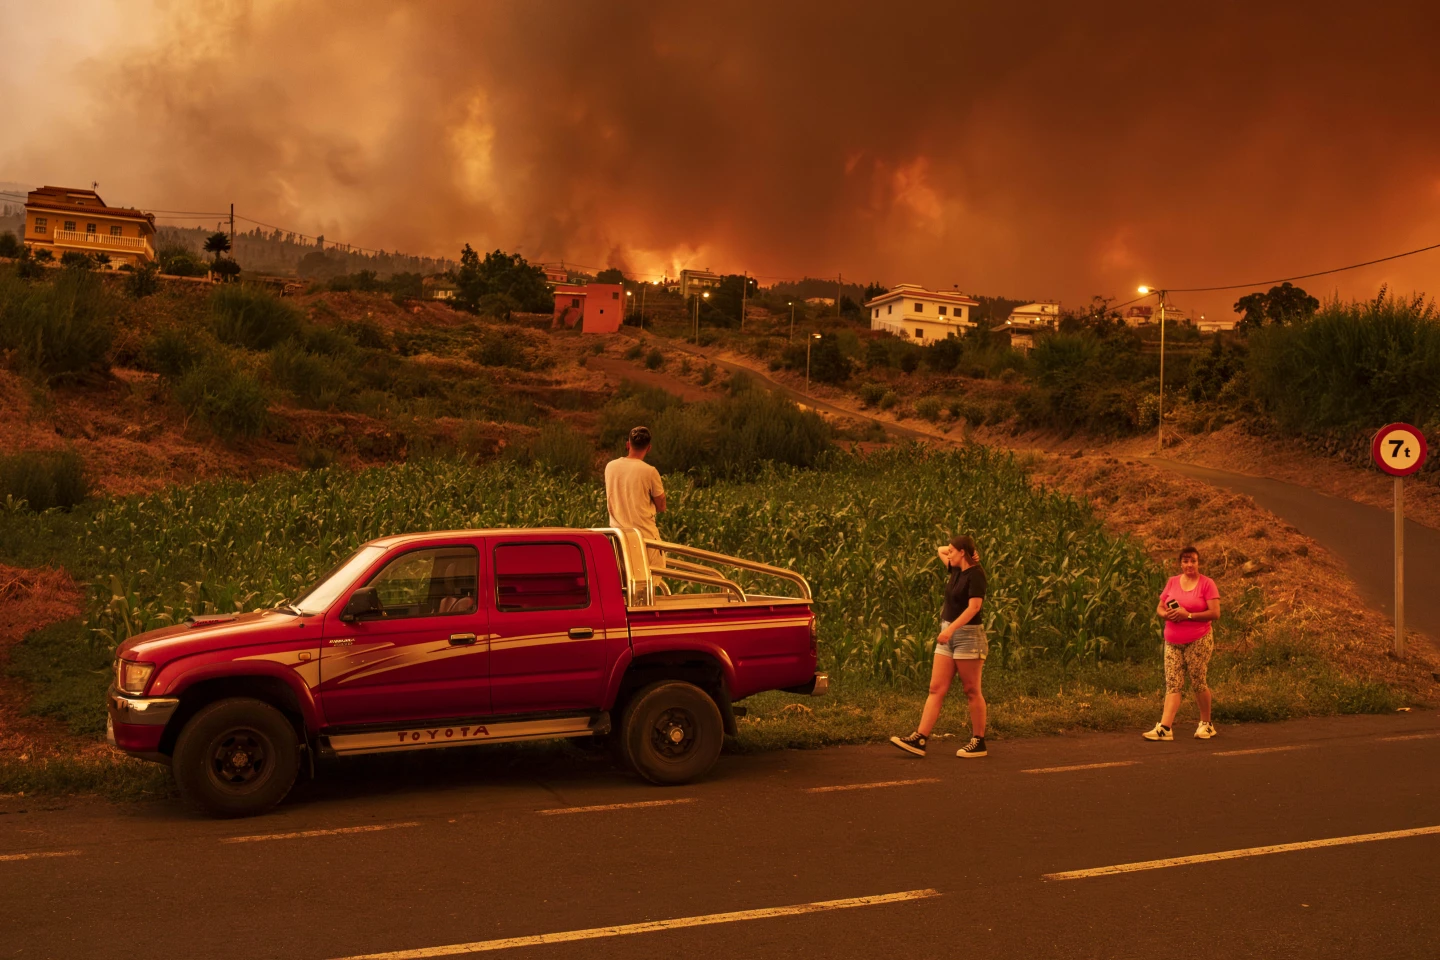 Canary Islands President Says 75,000 Hectare Wildfire Started Deliberately